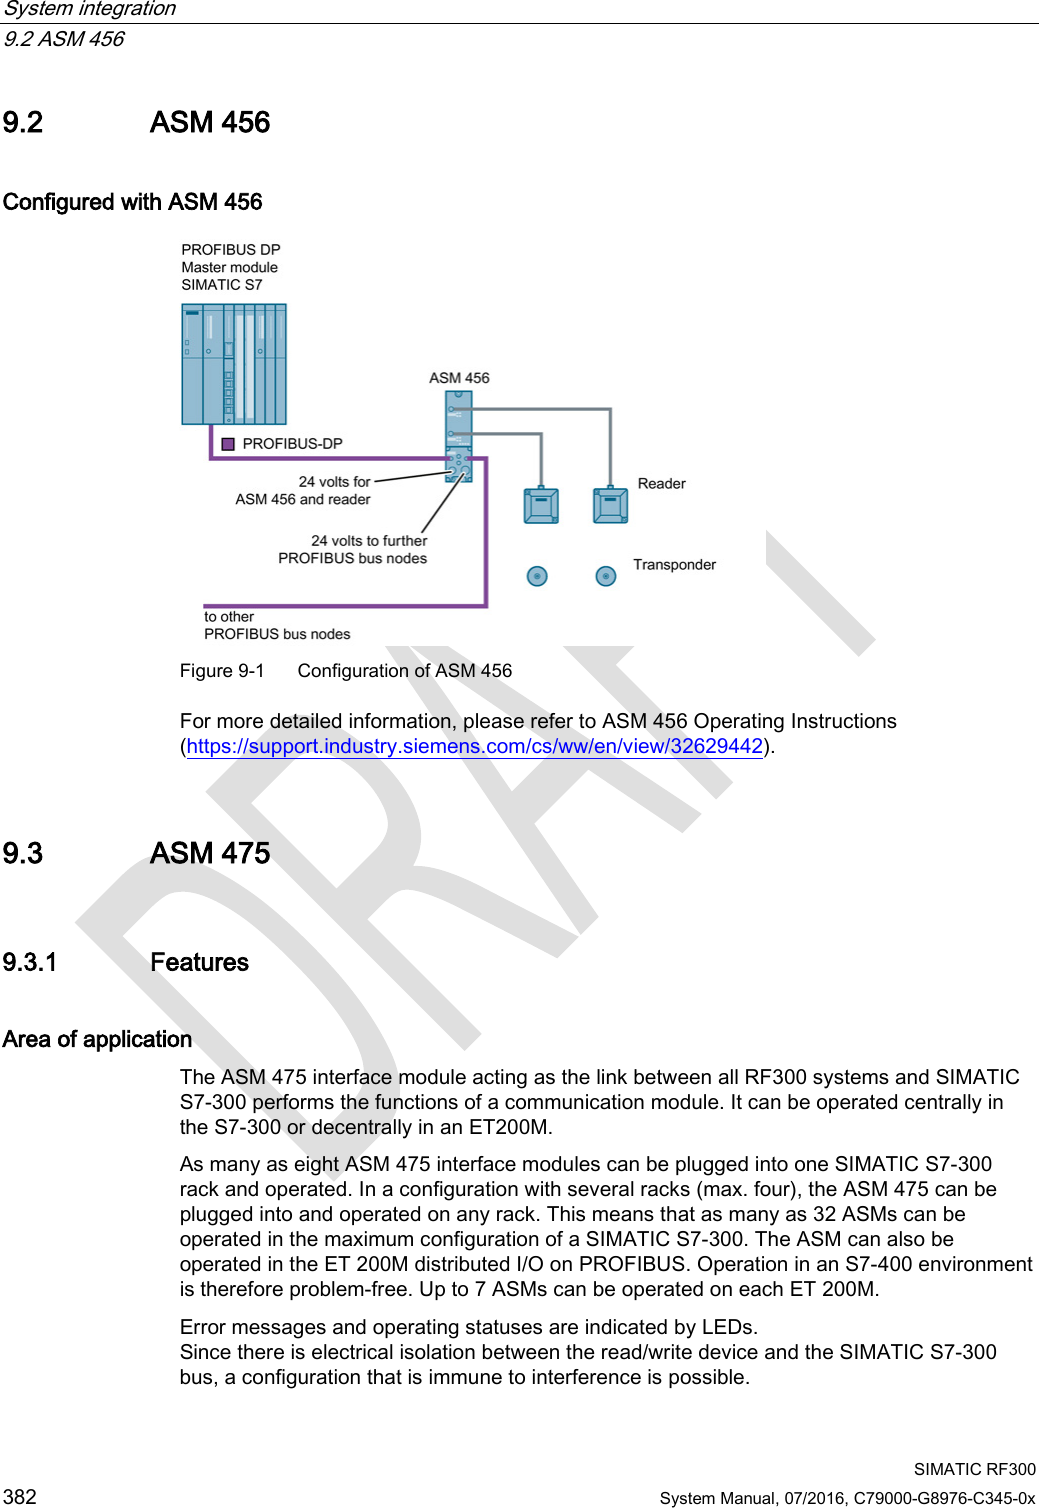 System integration   9.2 ASM 456  SIMATIC RF300 382 System Manual, 07/2016, C79000-G8976-C345-0x 9.2 ASM 456 Configured with ASM 456  Figure 9-1  Configuration of ASM 456 For more detailed information, please refer to ASM 456 Operating Instructions (https://support.industry.siemens.com/cs/ww/en/view/32629442). 9.3 ASM 475 9.3.1 Features Area of application The ASM 475 interface module acting as the link between all RF300 systems and SIMATIC S7-300 performs the functions of a communication module. It can be operated centrally in the S7-300 or decentrally in an ET200M. As many as eight ASM 475 interface modules can be plugged into one SIMATIC S7-300 rack and operated. In a configuration with several racks (max. four), the ASM 475 can be plugged into and operated on any rack. This means that as many as 32 ASMs can be operated in the maximum configuration of a SIMATIC S7-300. The ASM can also be operated in the ET 200M distributed I/O on PROFIBUS. Operation in an S7-400 environment is therefore problem-free. Up to 7 ASMs can be operated on each ET 200M. Error messages and operating statuses are indicated by LEDs. Since there is electrical isolation between the read/write device and the SIMATIC S7-300 bus, a configuration that is immune to interference is possible. 